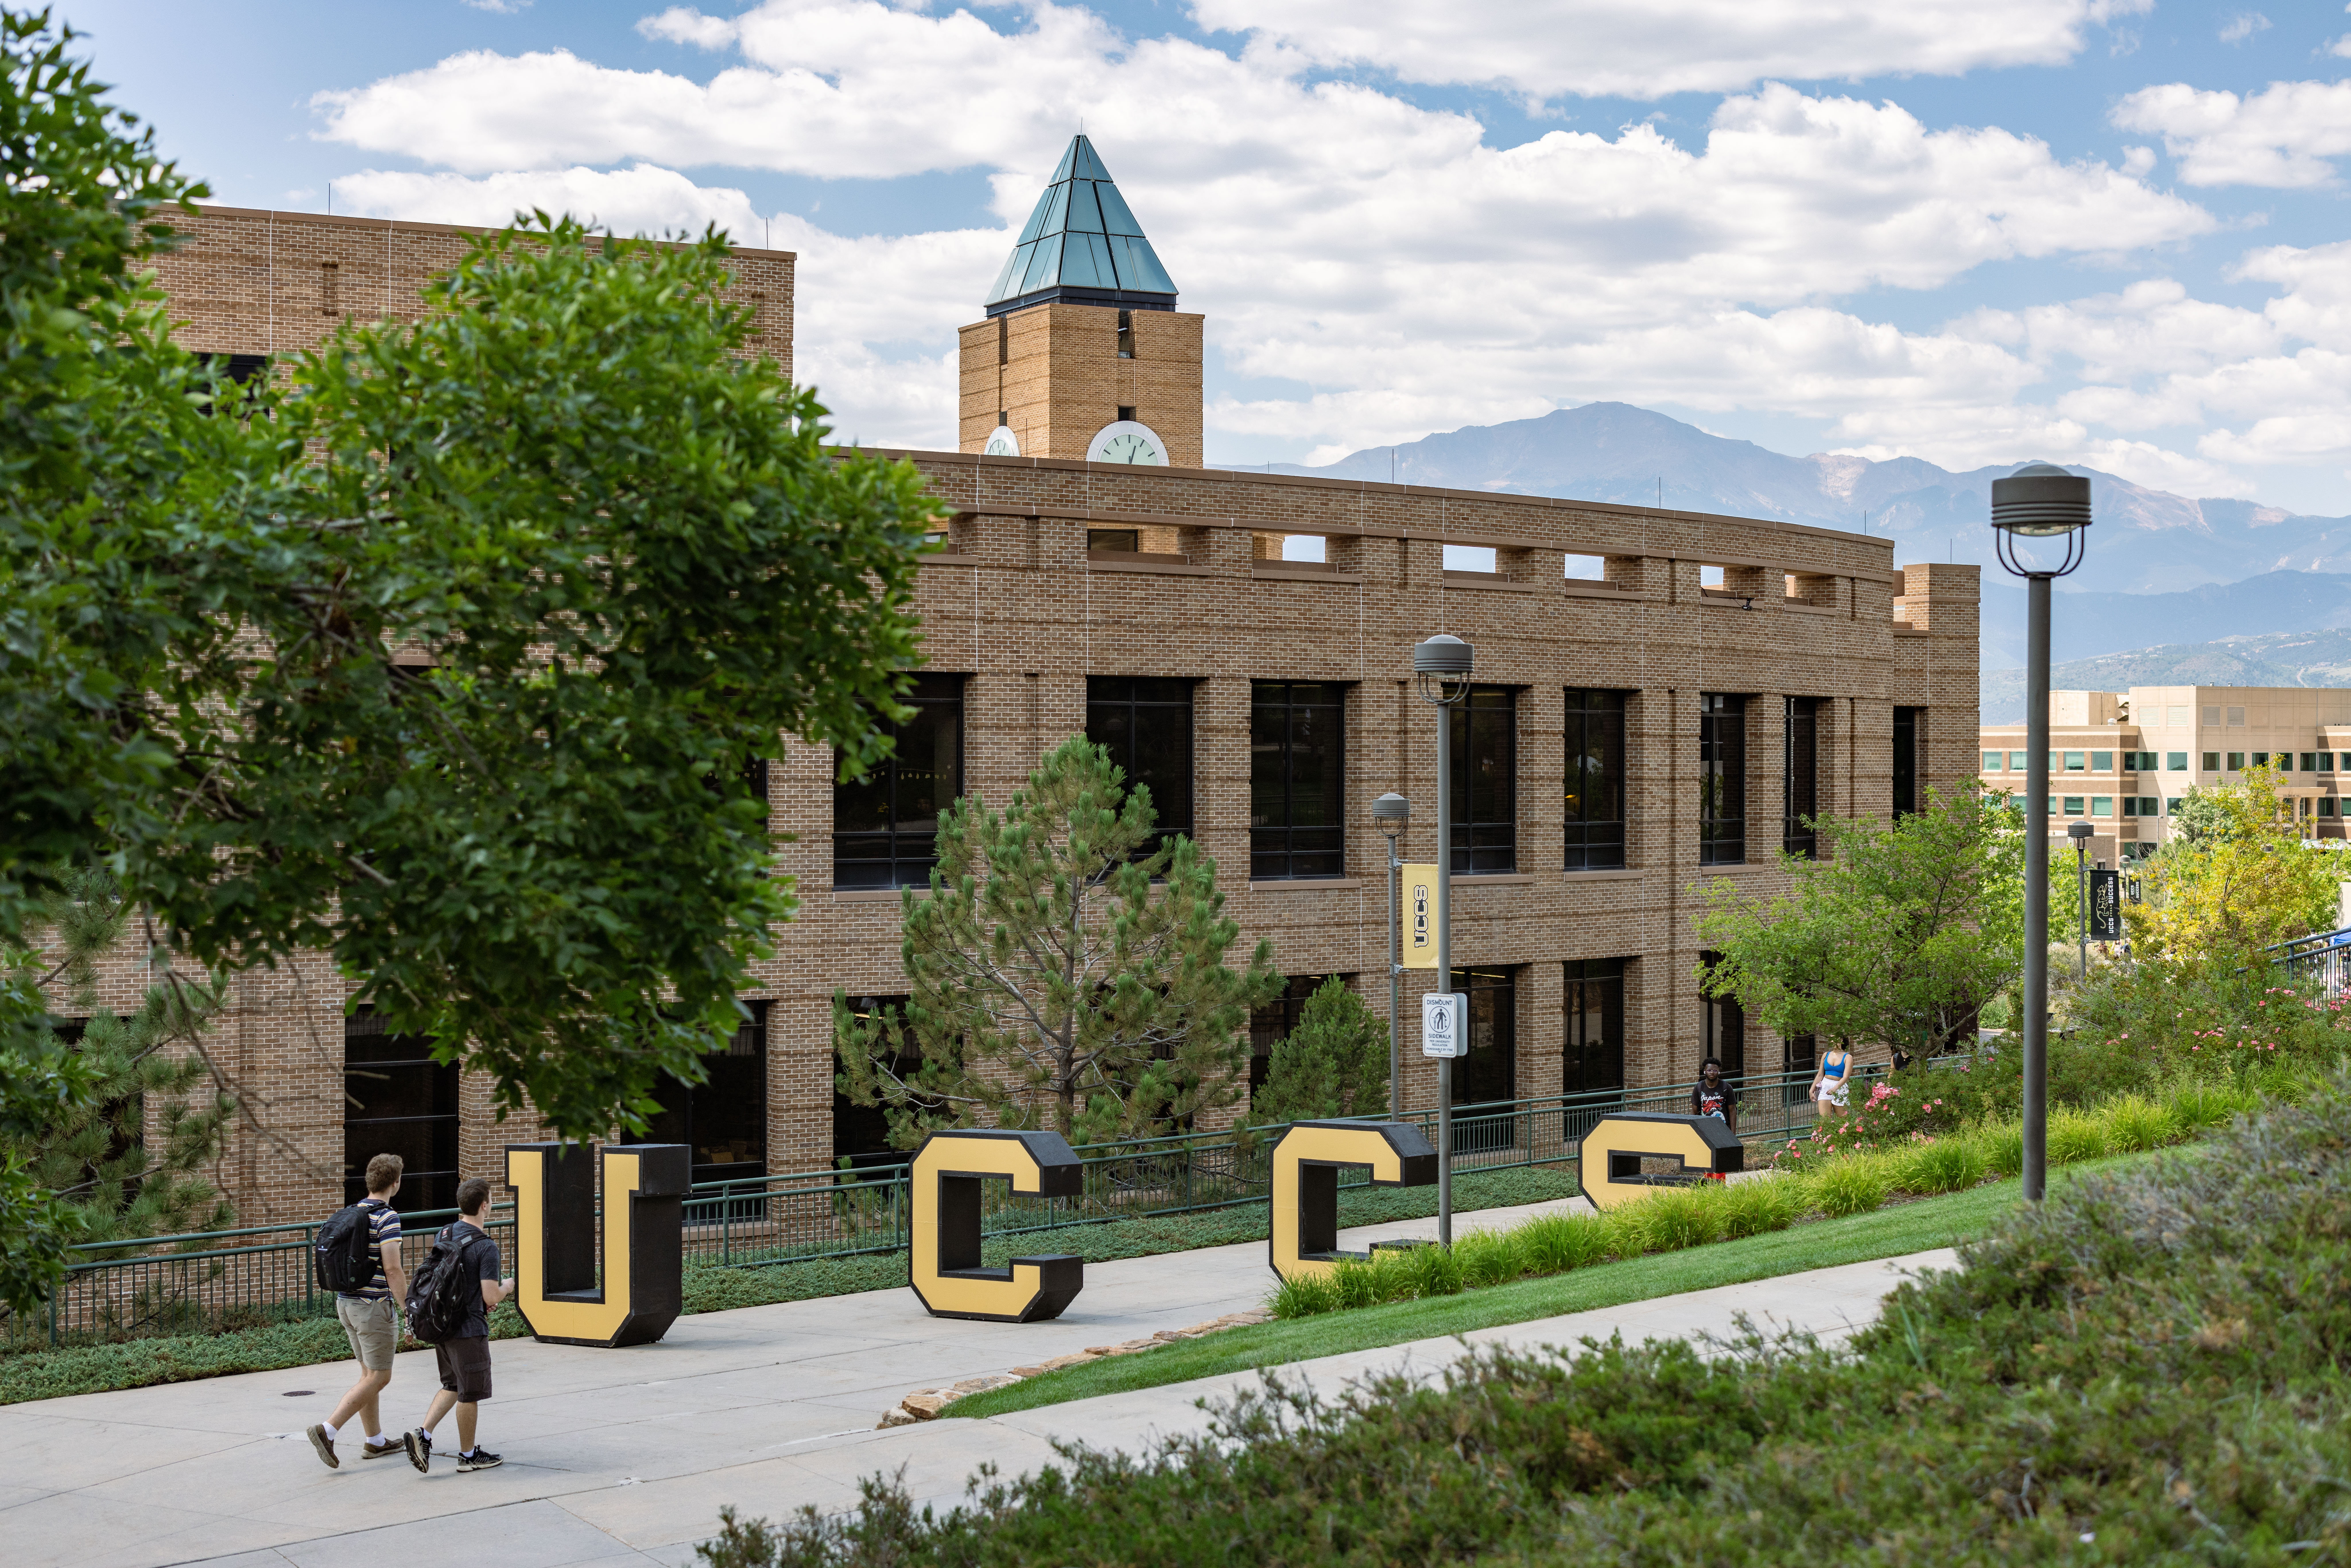 UCCS Letters outside of library